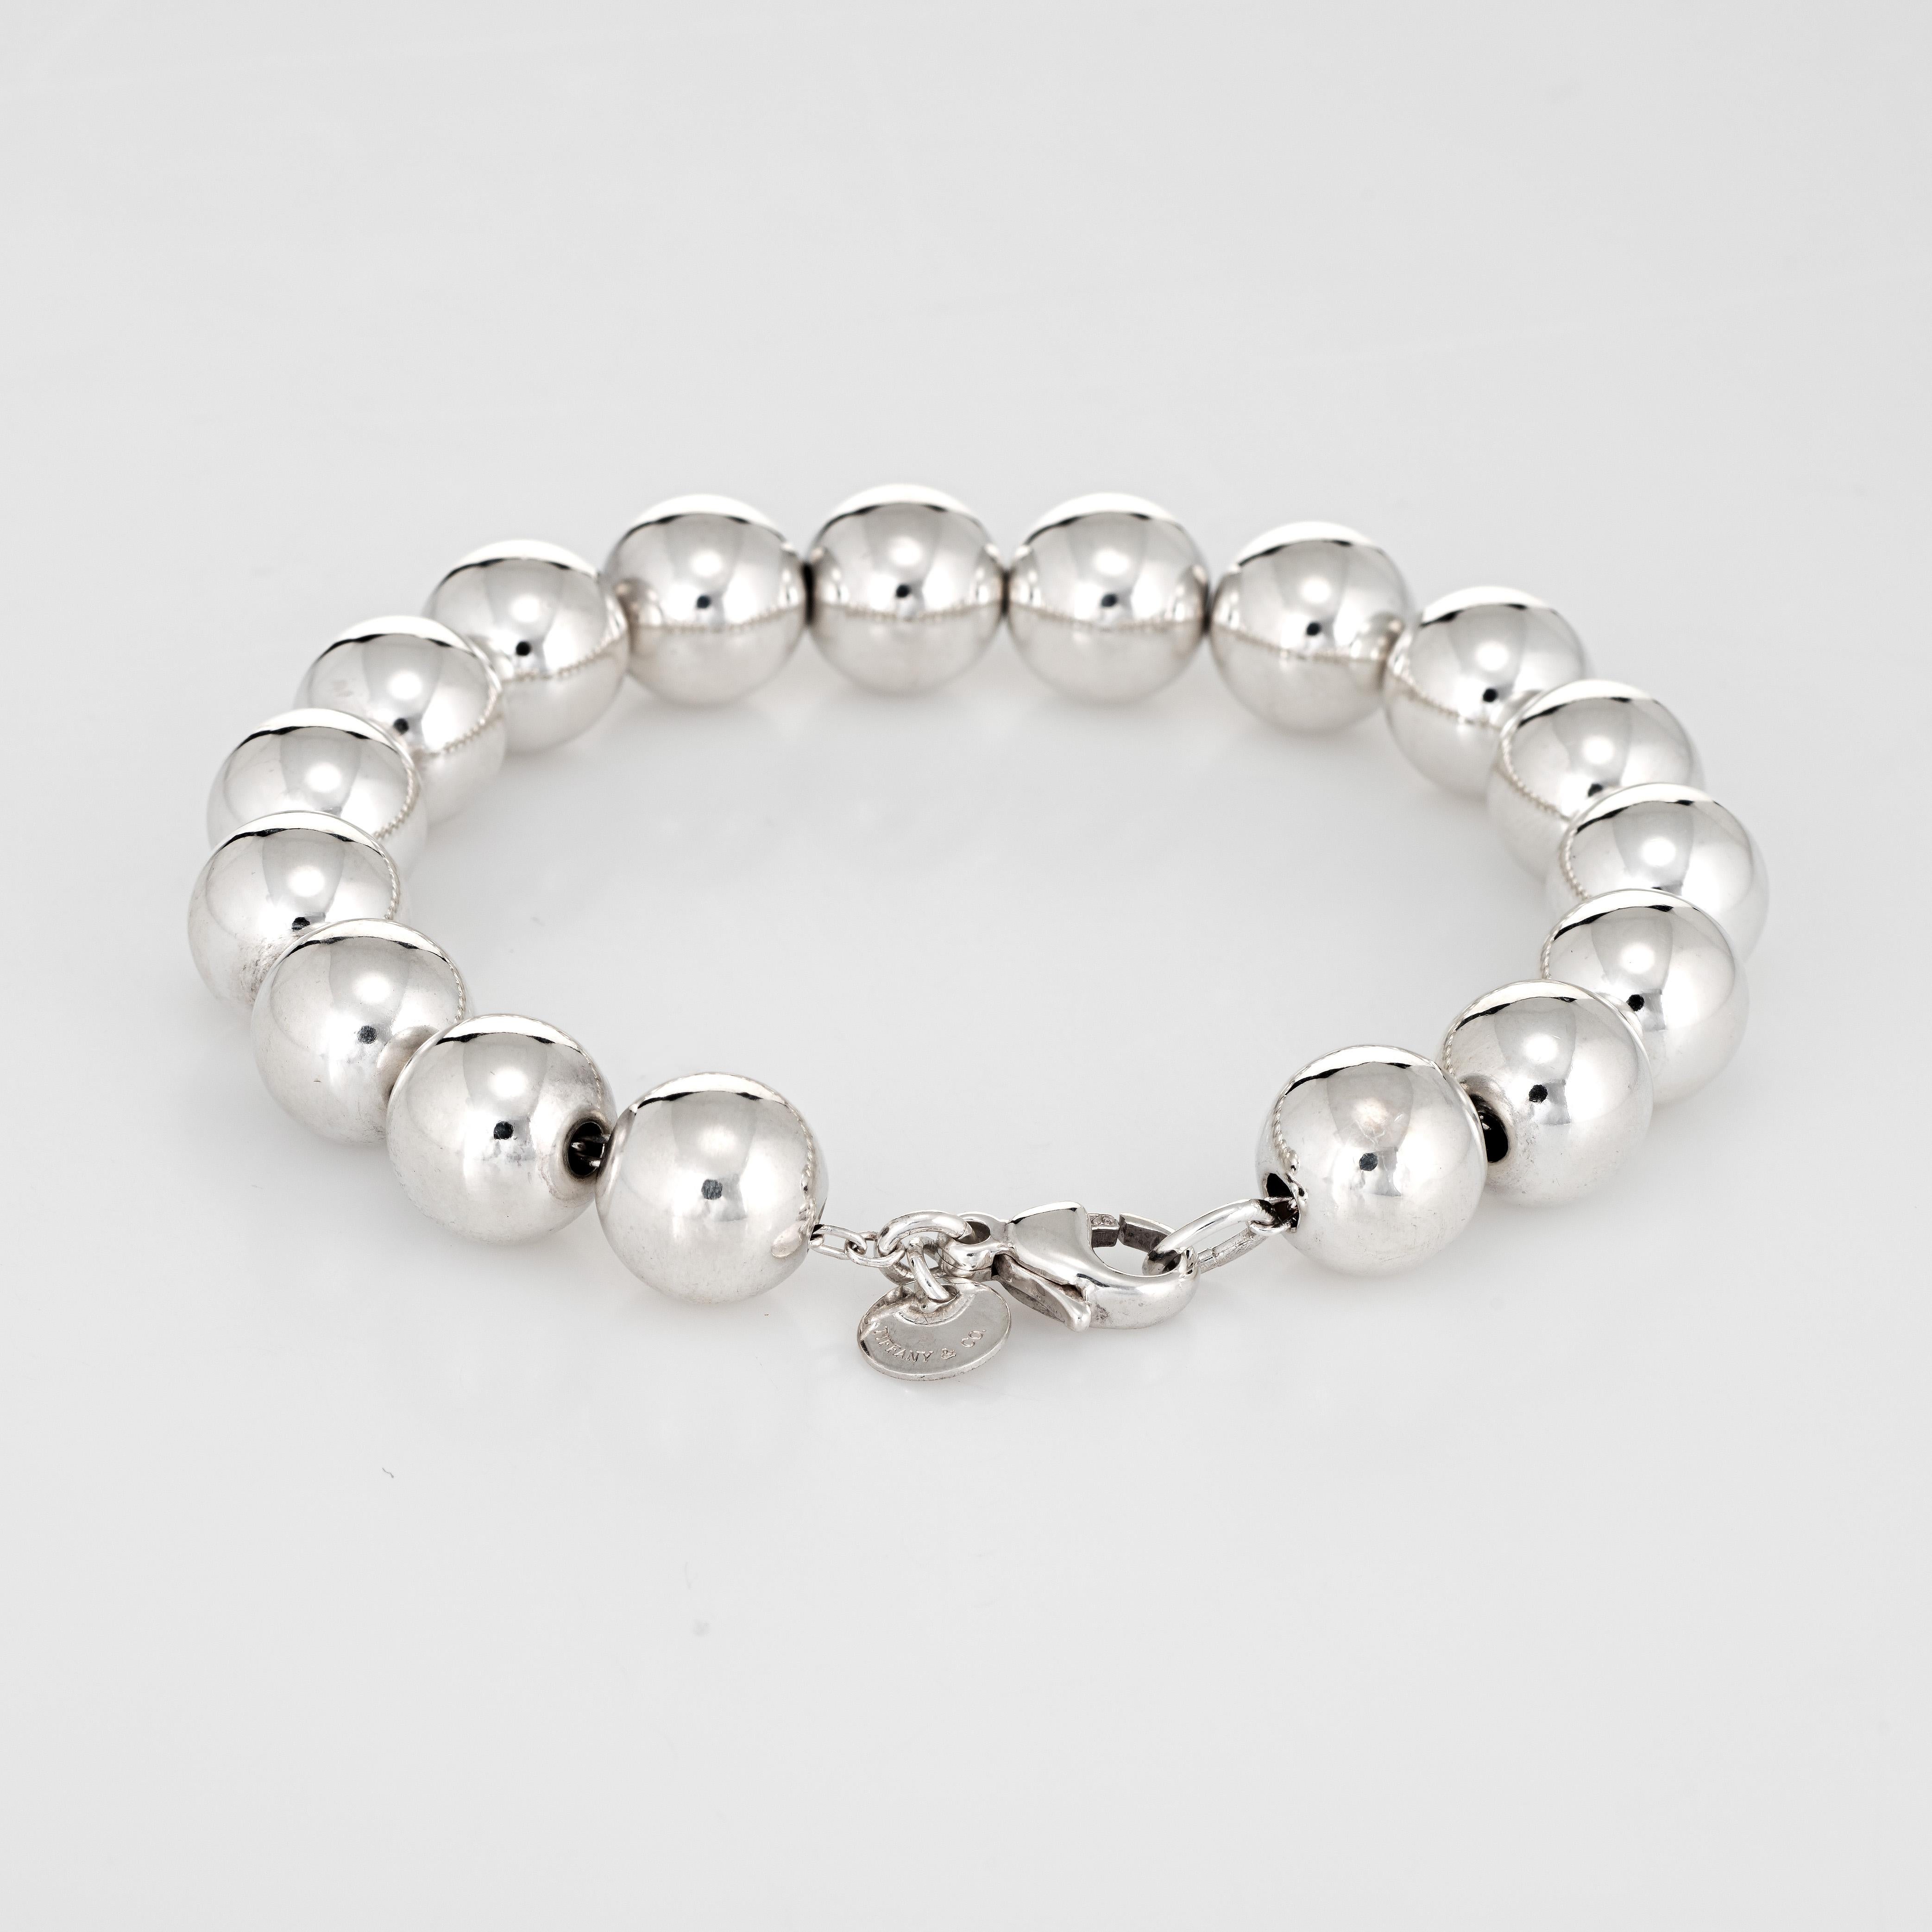 Stylish pre owned Tiffany & Co silver bead bracelet crafted in 925 sterling silver.  

The bracelet features silver beads that are uniform in size (9mm).

The bracelet is in excellent condition and was recently professionally cleaned and polished.